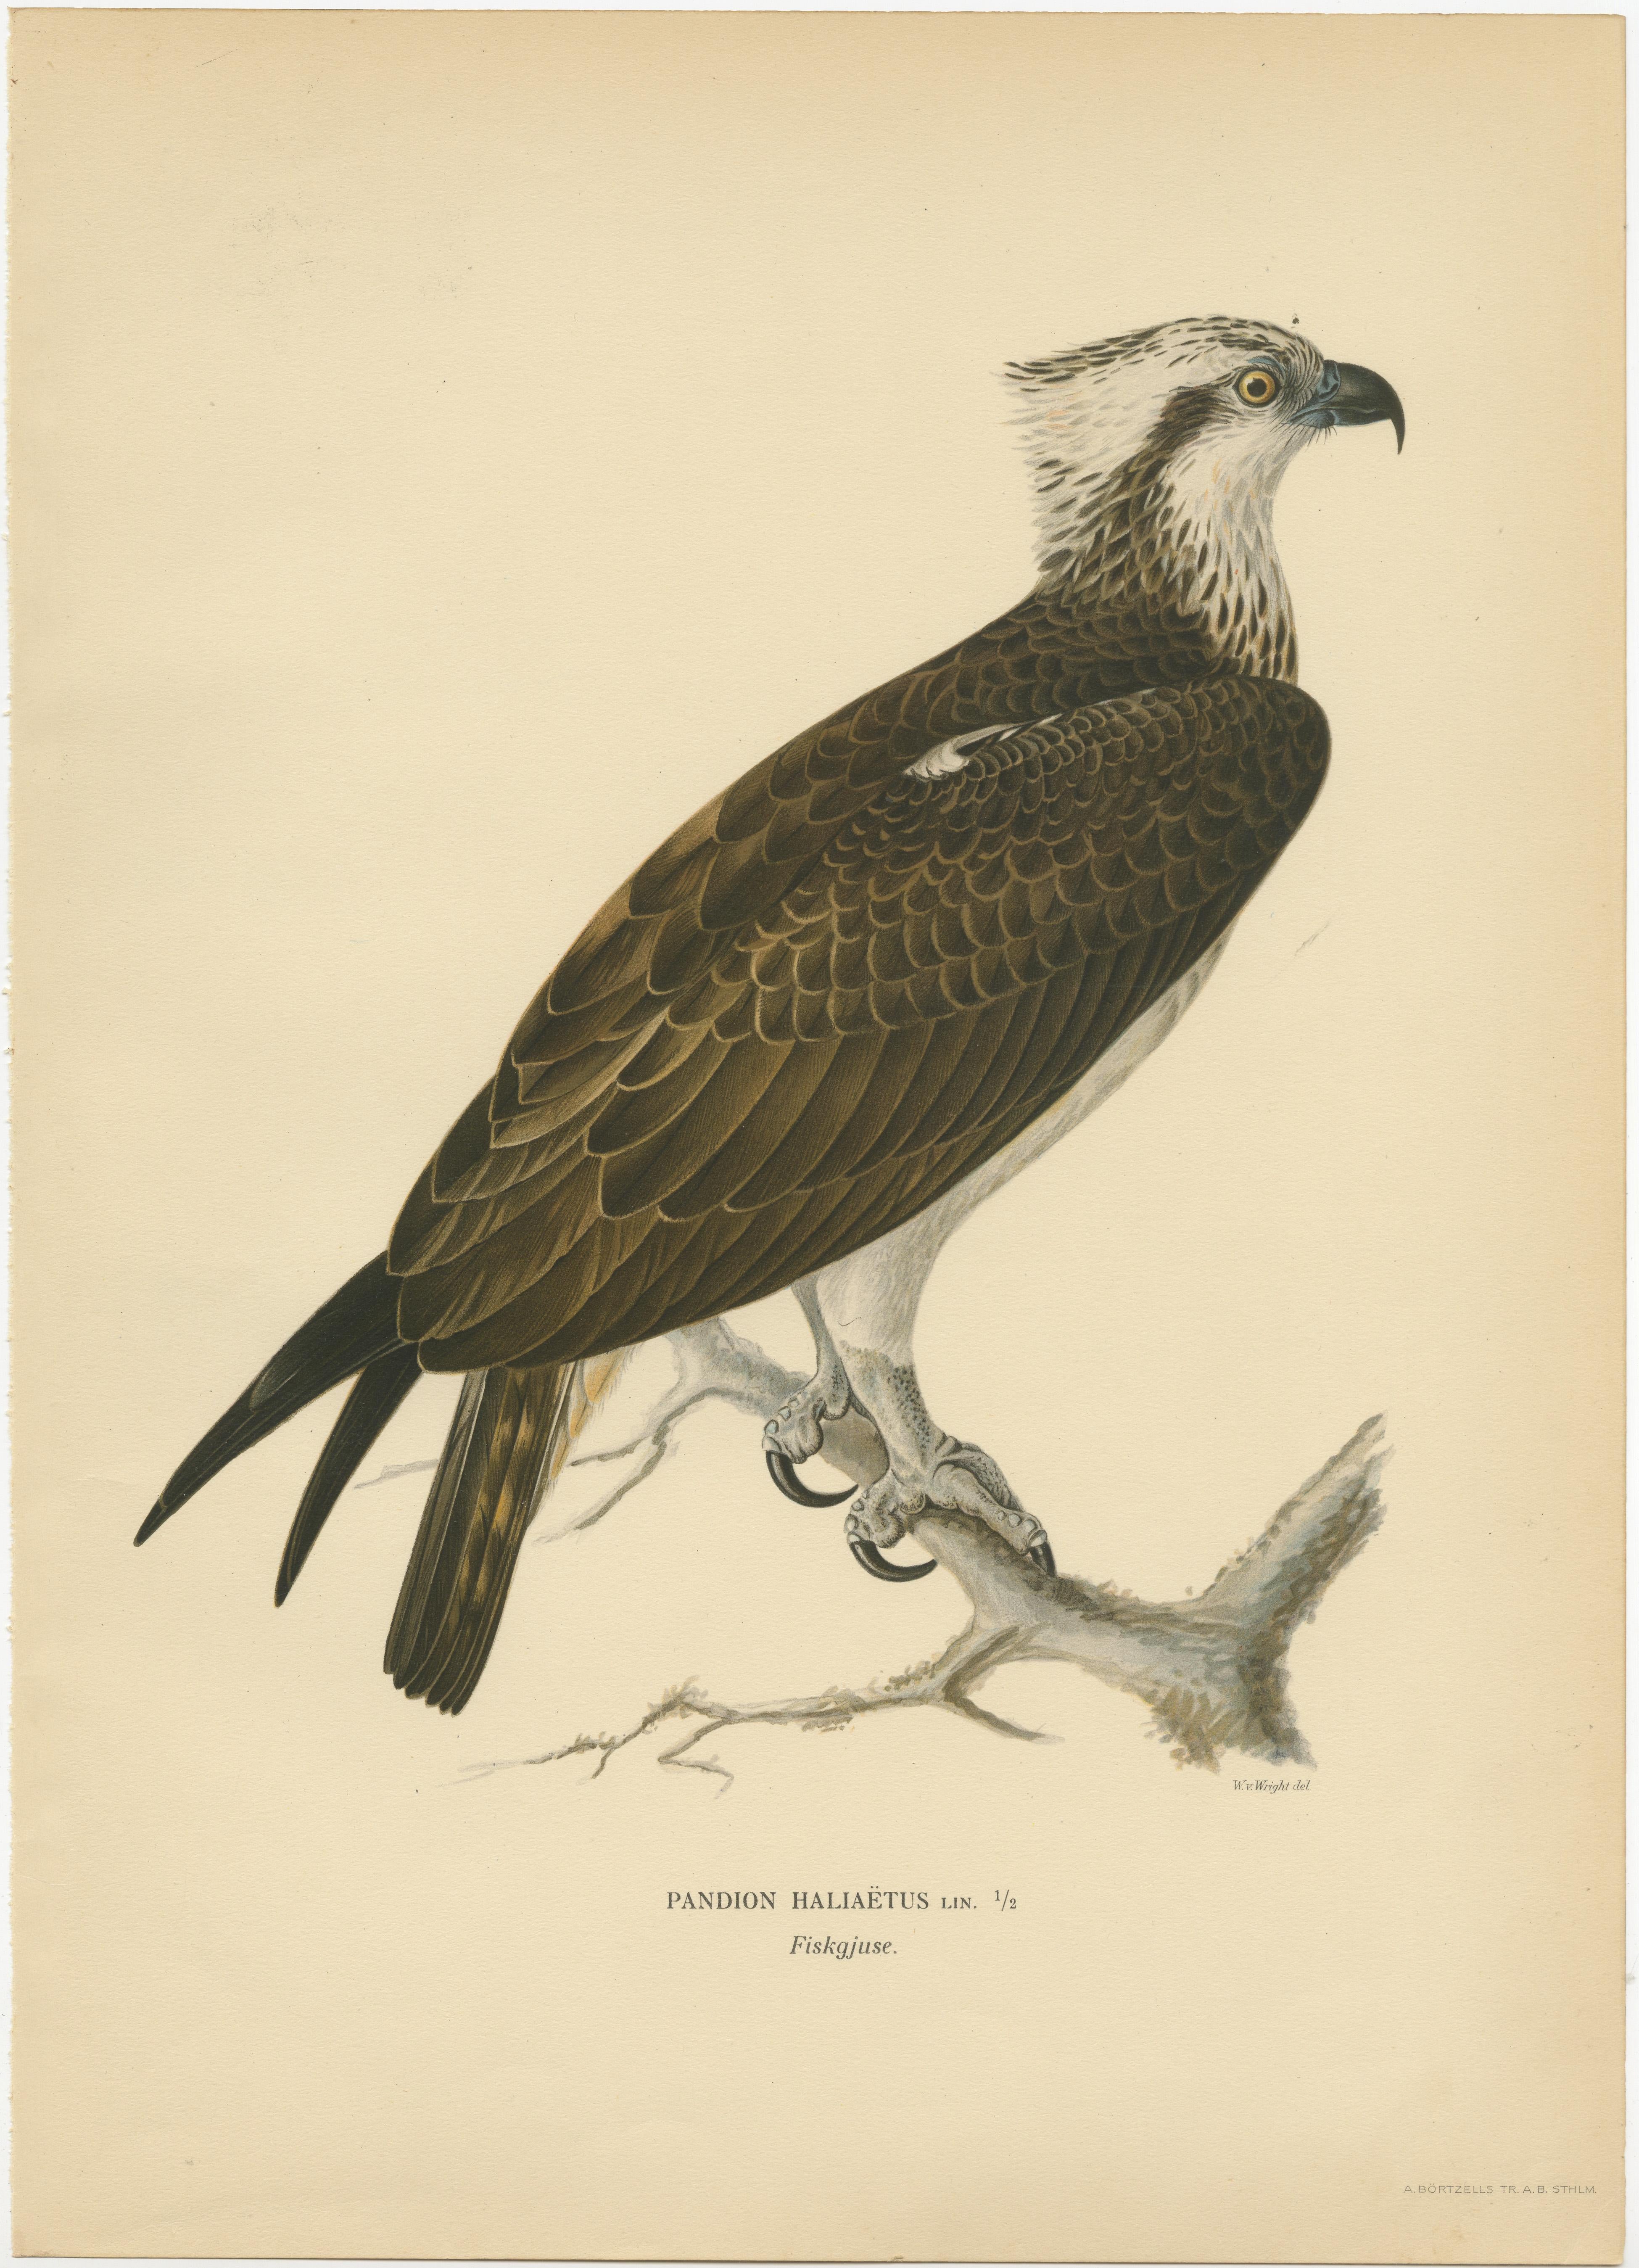 This striking image of the Pandion Haliaëtus, or osprey, from the 1929 folio edition of 